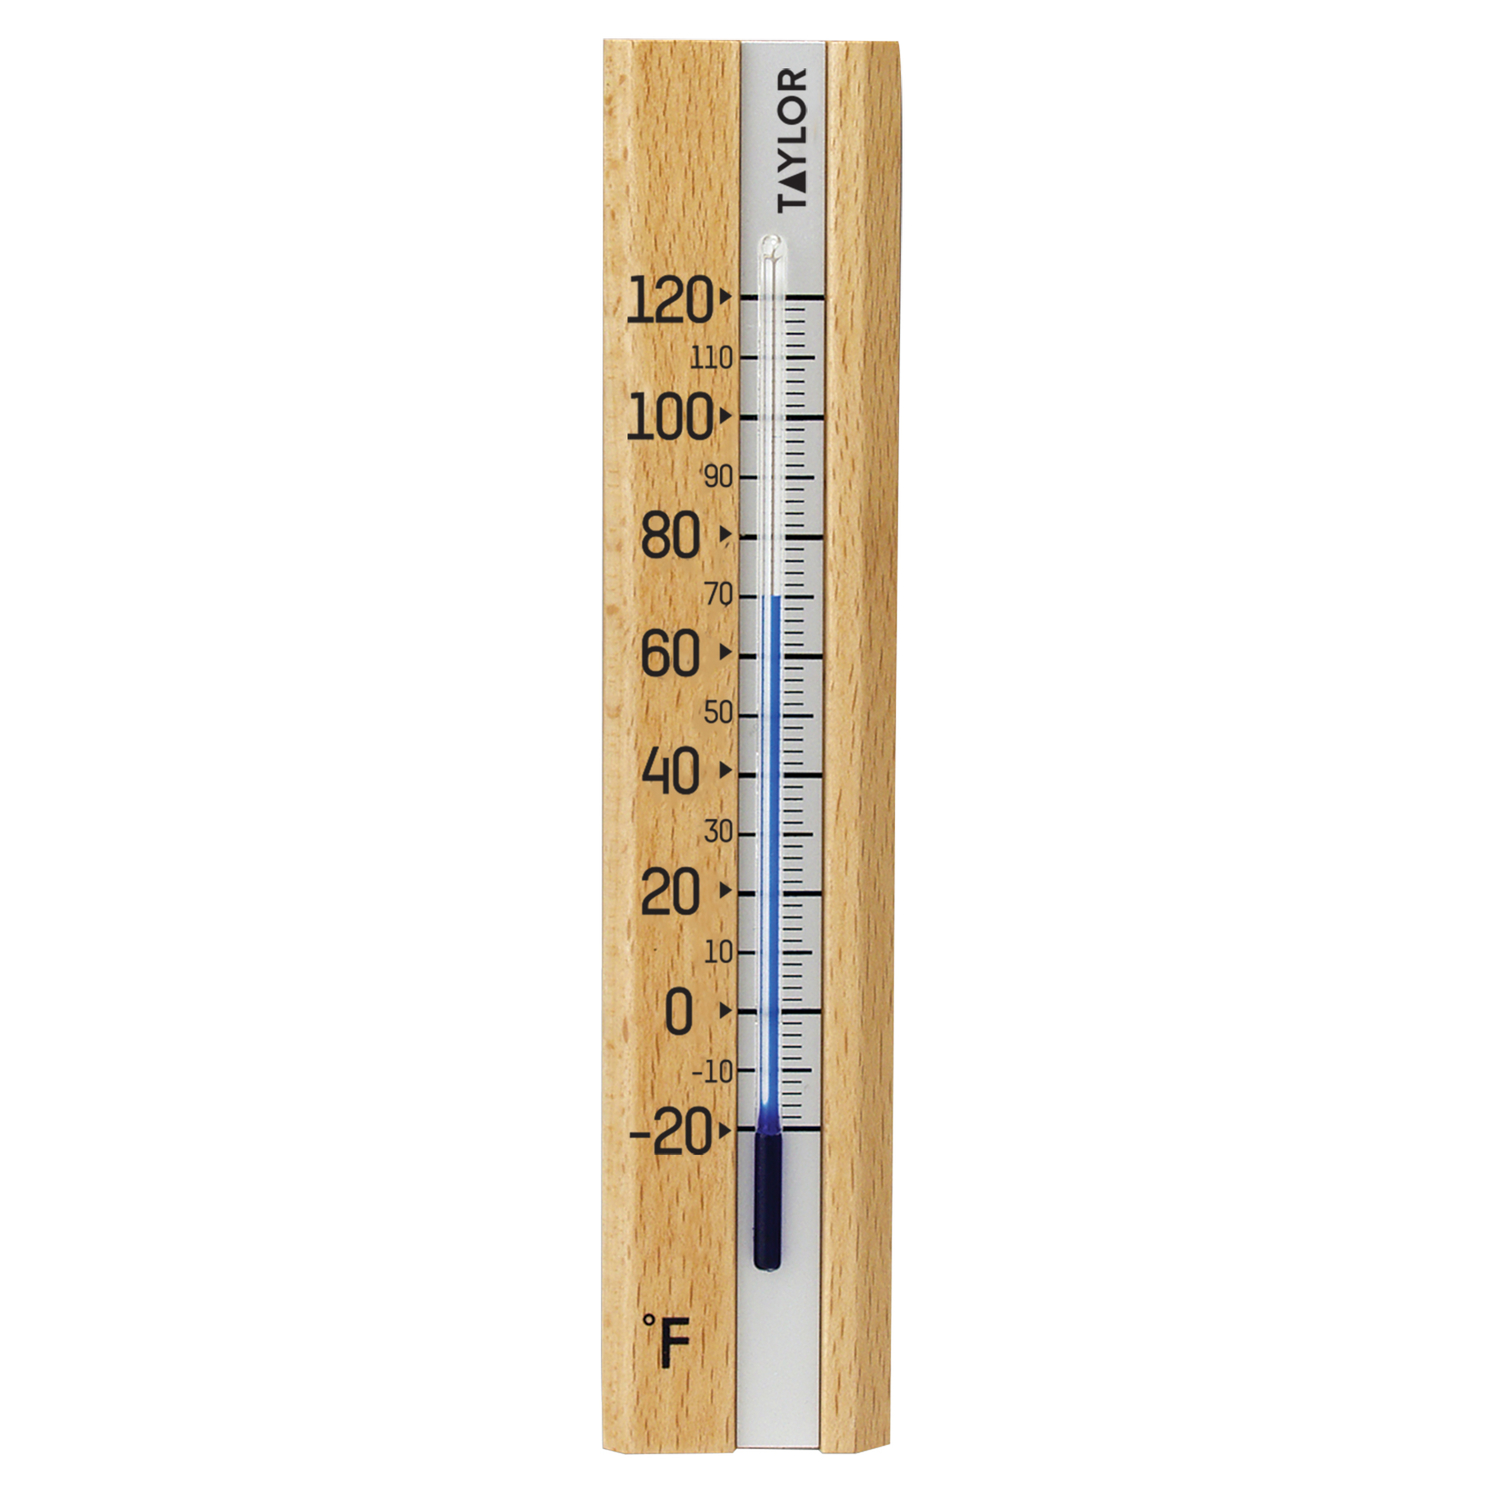 stores that sell thermometers